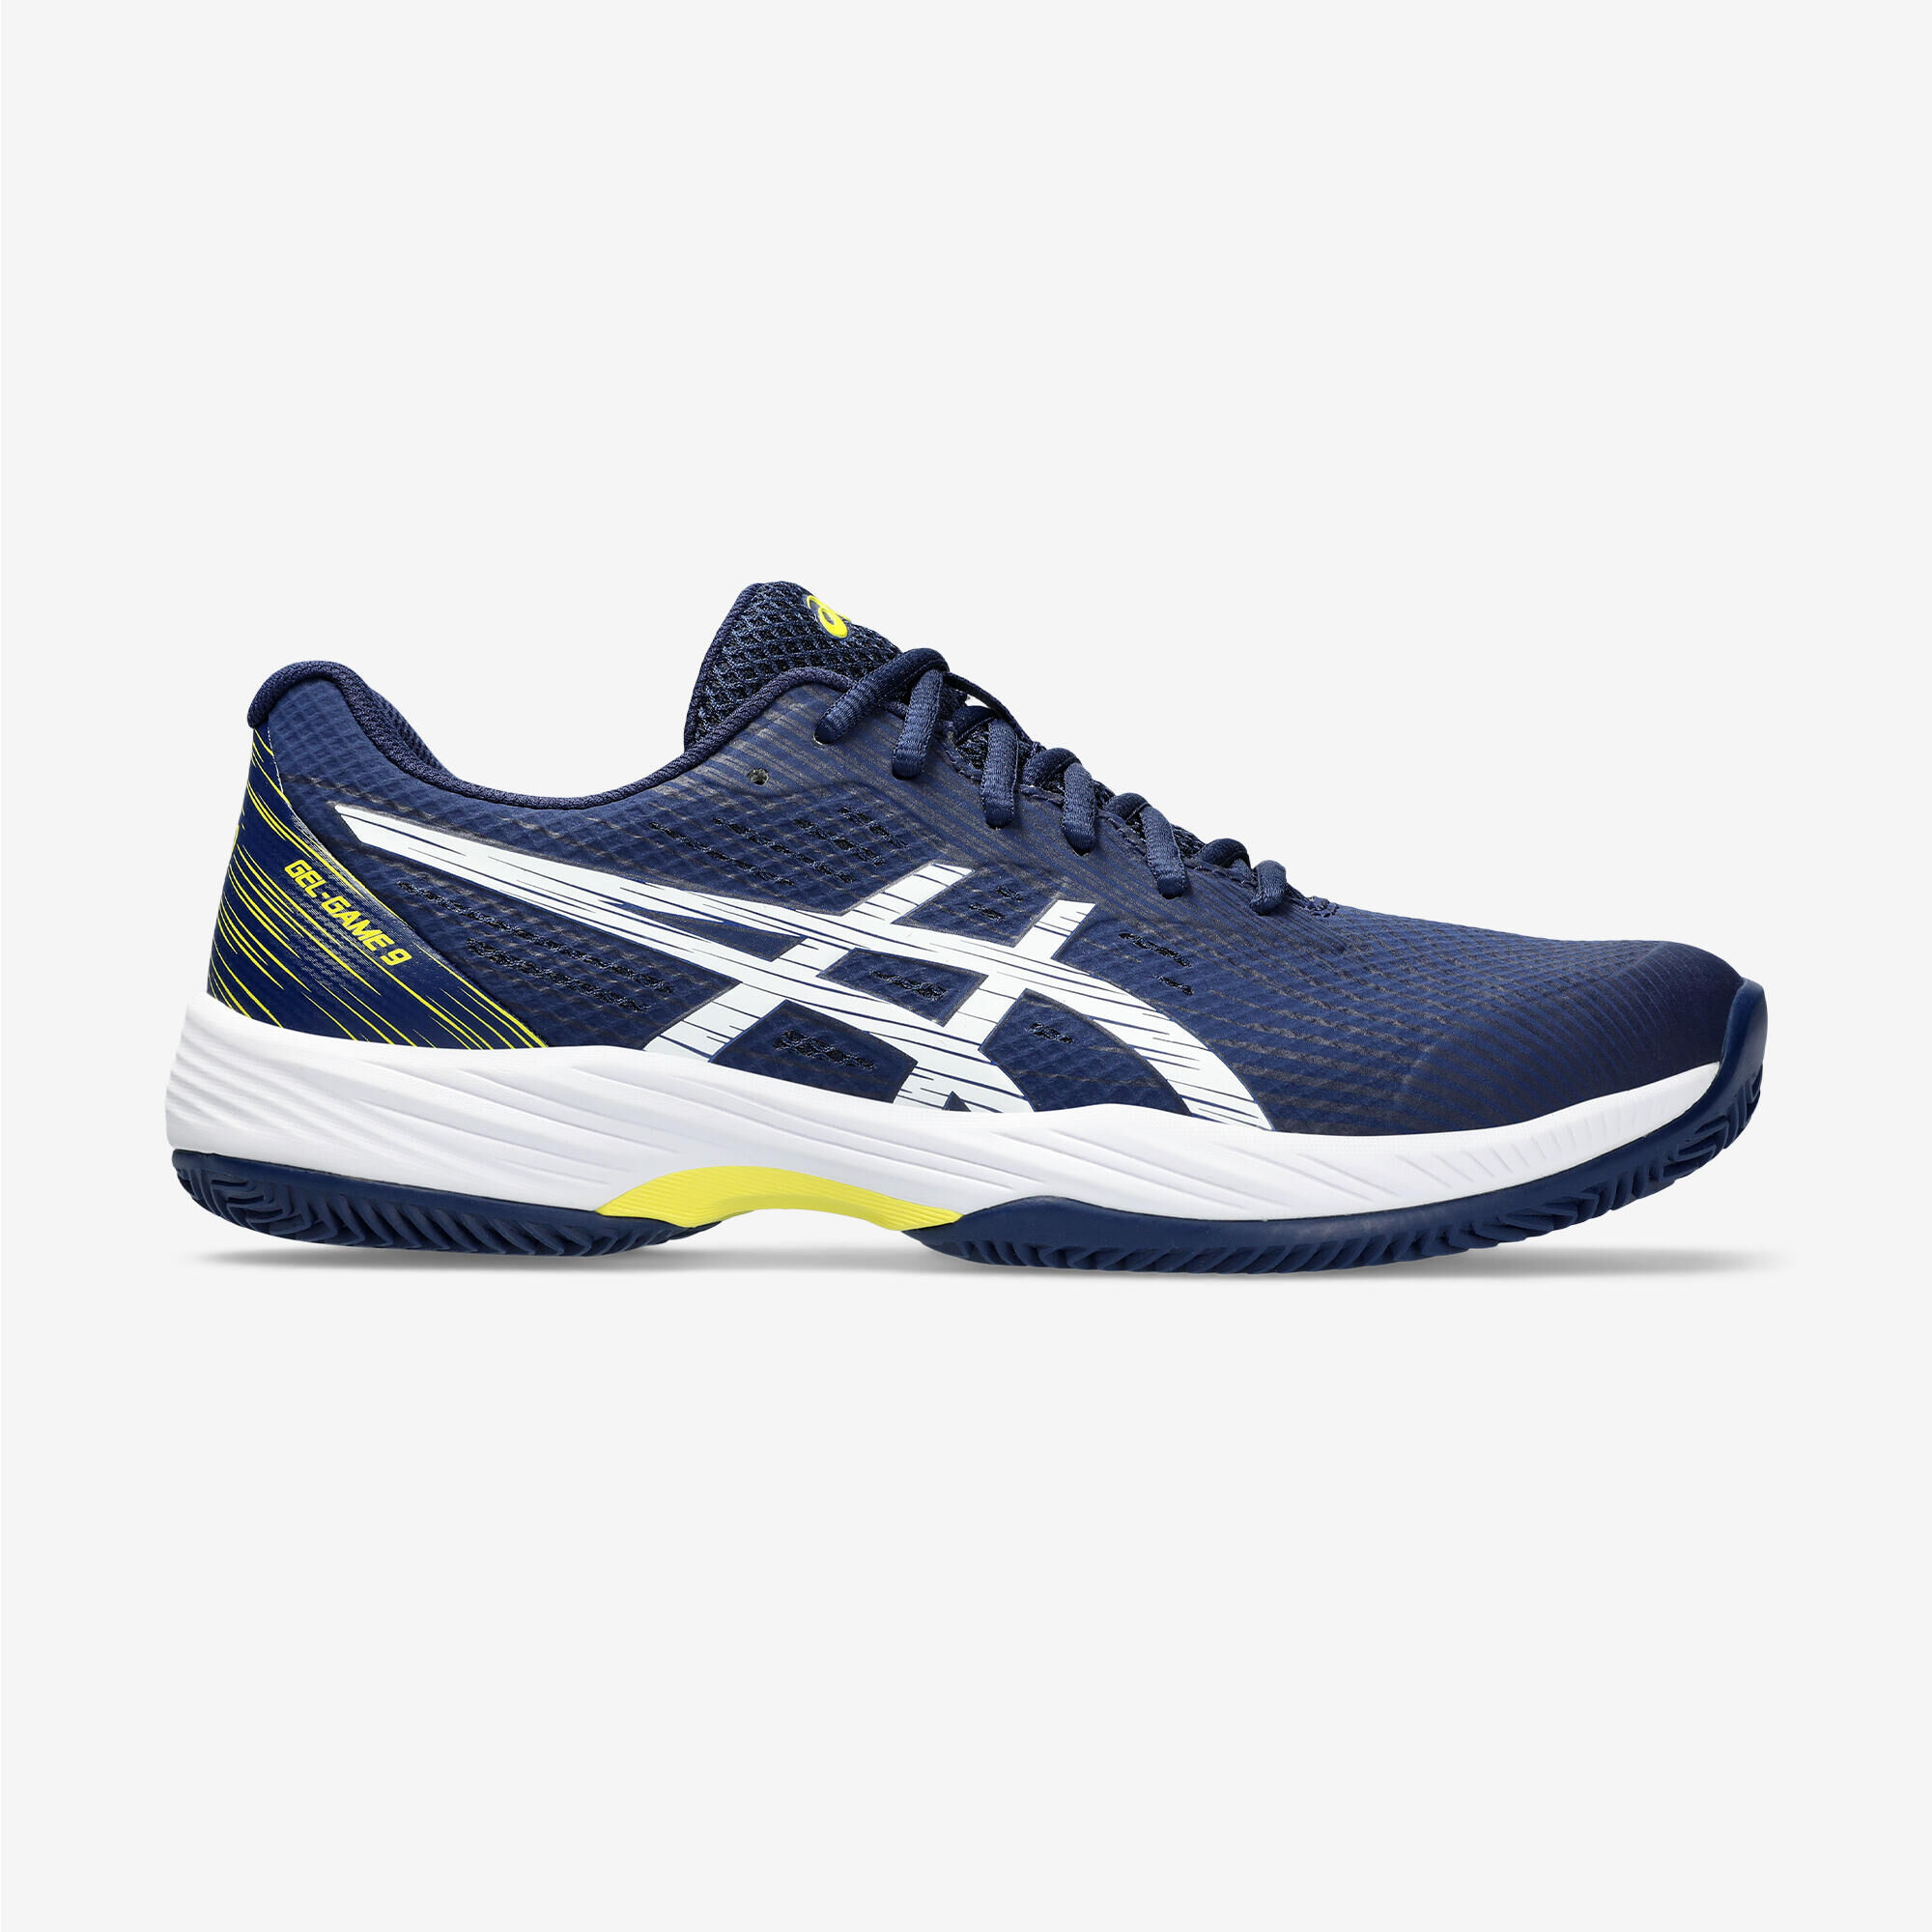 ASICS Men's Tennis Clay Court Shoes Gel Game 9 - Blue/Yellow